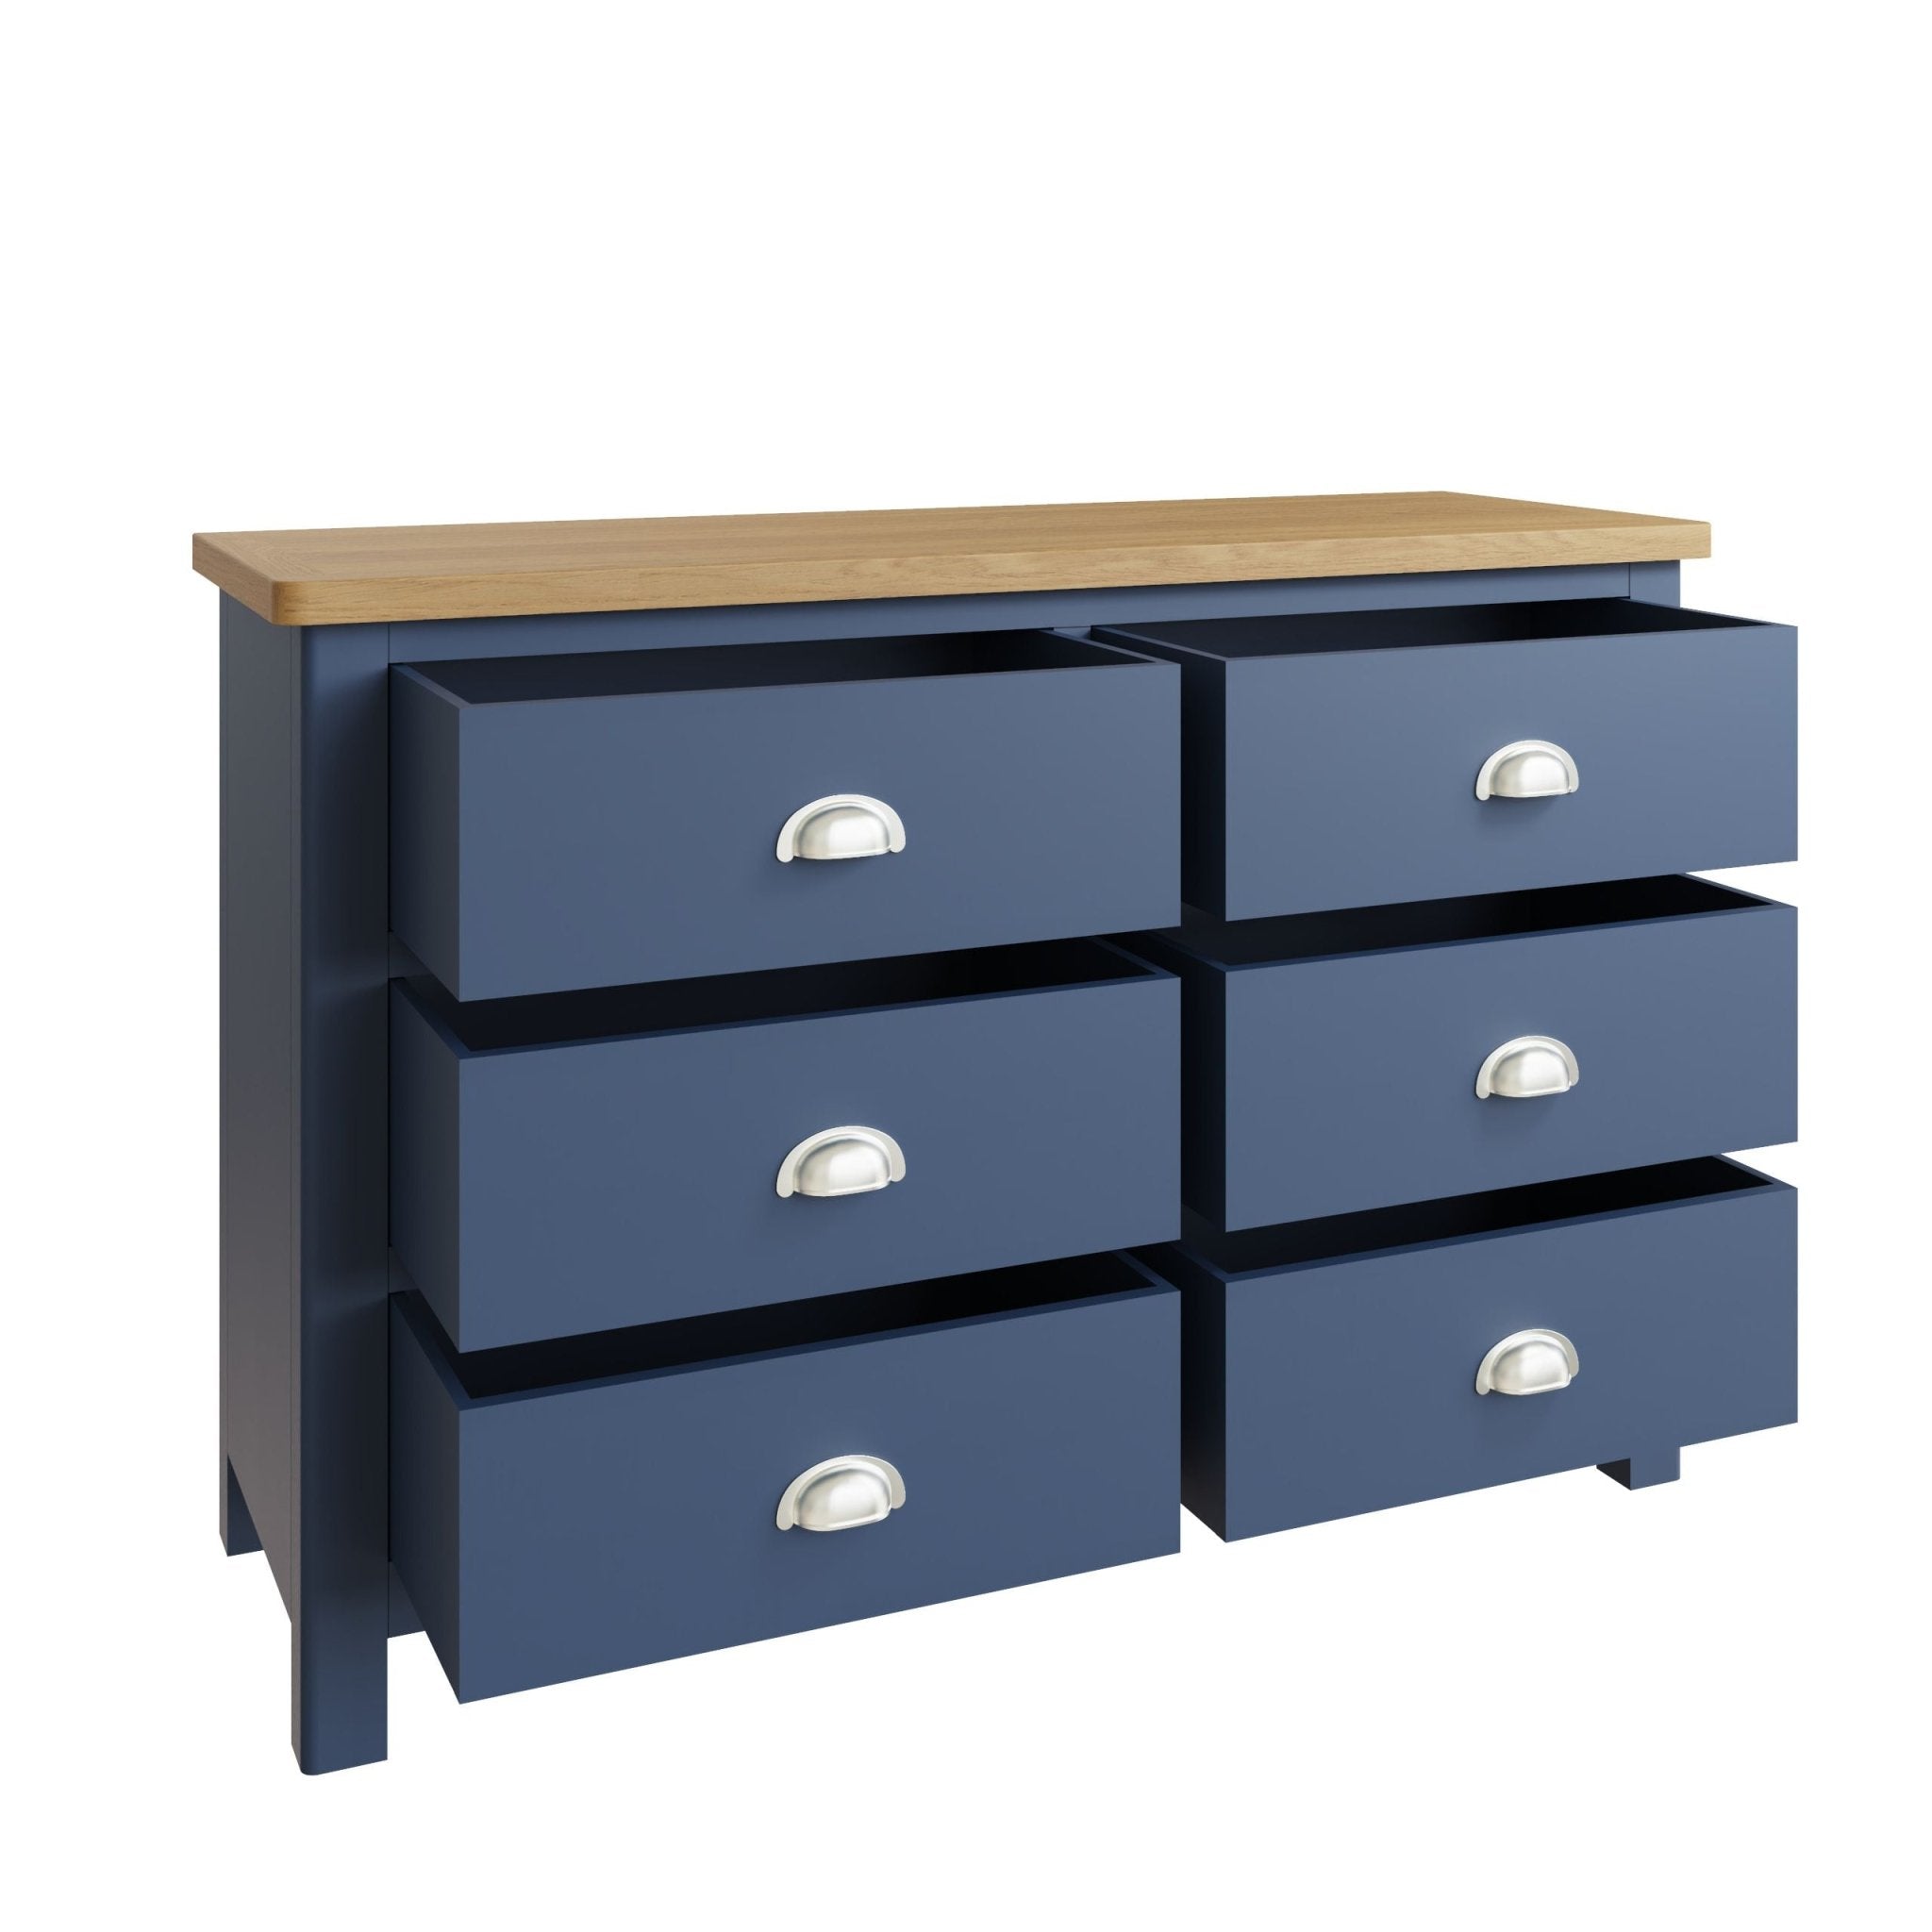 Bluebell Wood Chest of 6 Drawers - Duck Barn Interiors